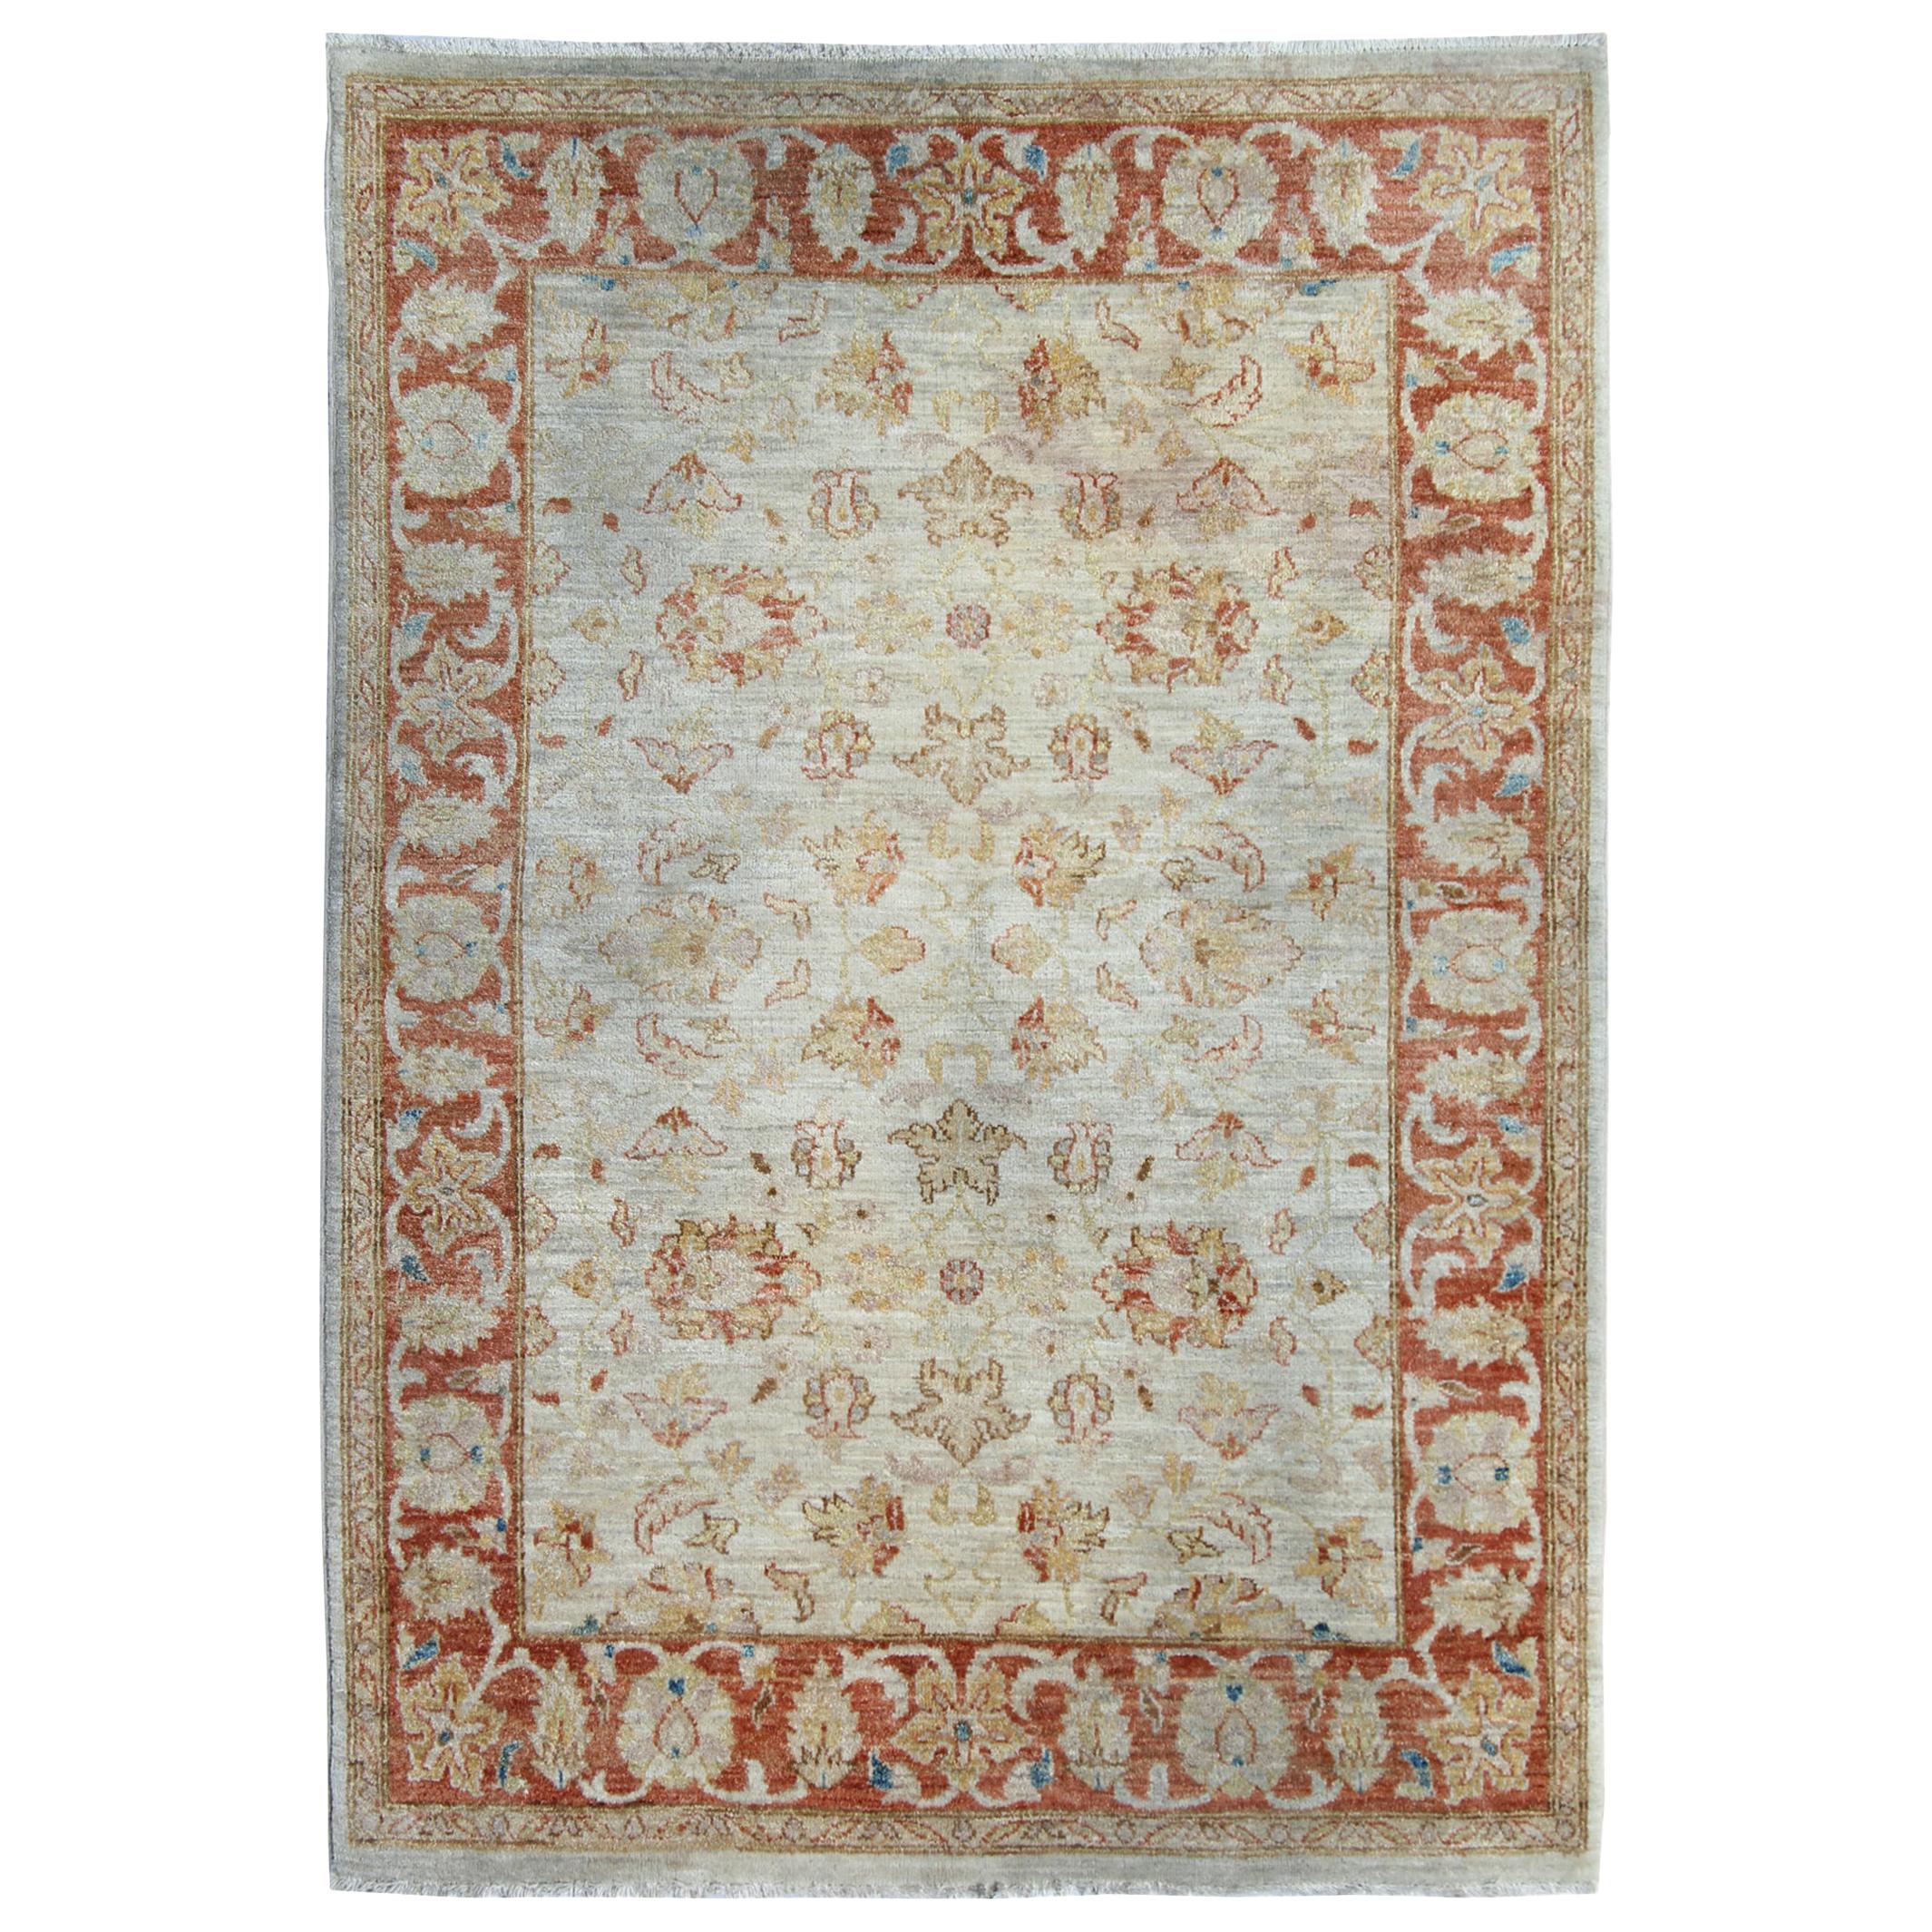 Blue Oriental Rugs Gold Living Room Rugs Handmade Carpets For Sale at ...